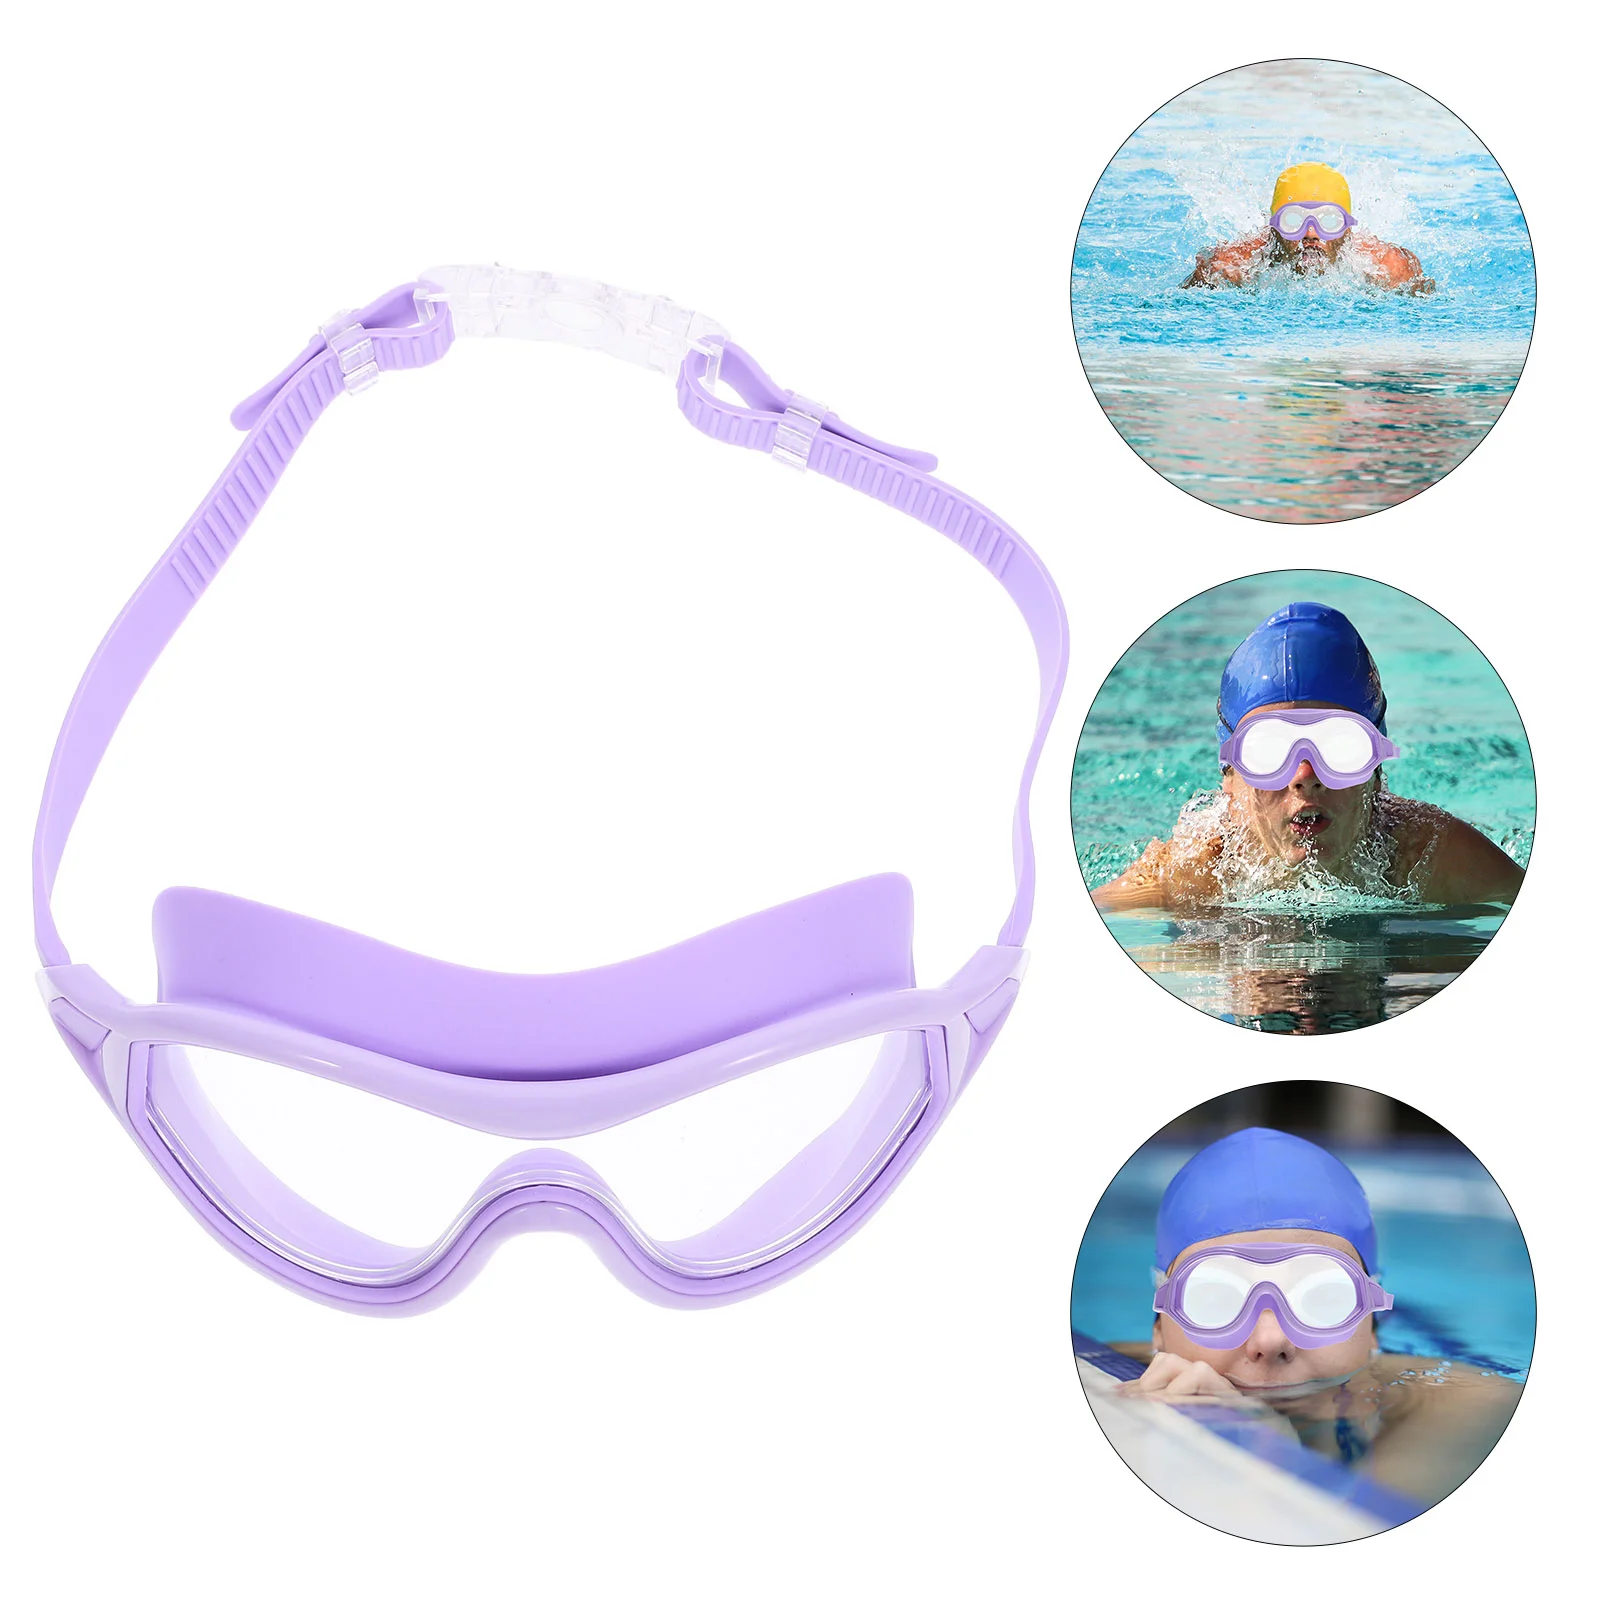 

Waterproof Swimming Goggles Large Frame Adjustable Adults Unisex Glasses Lightweight Convenient Men and Women